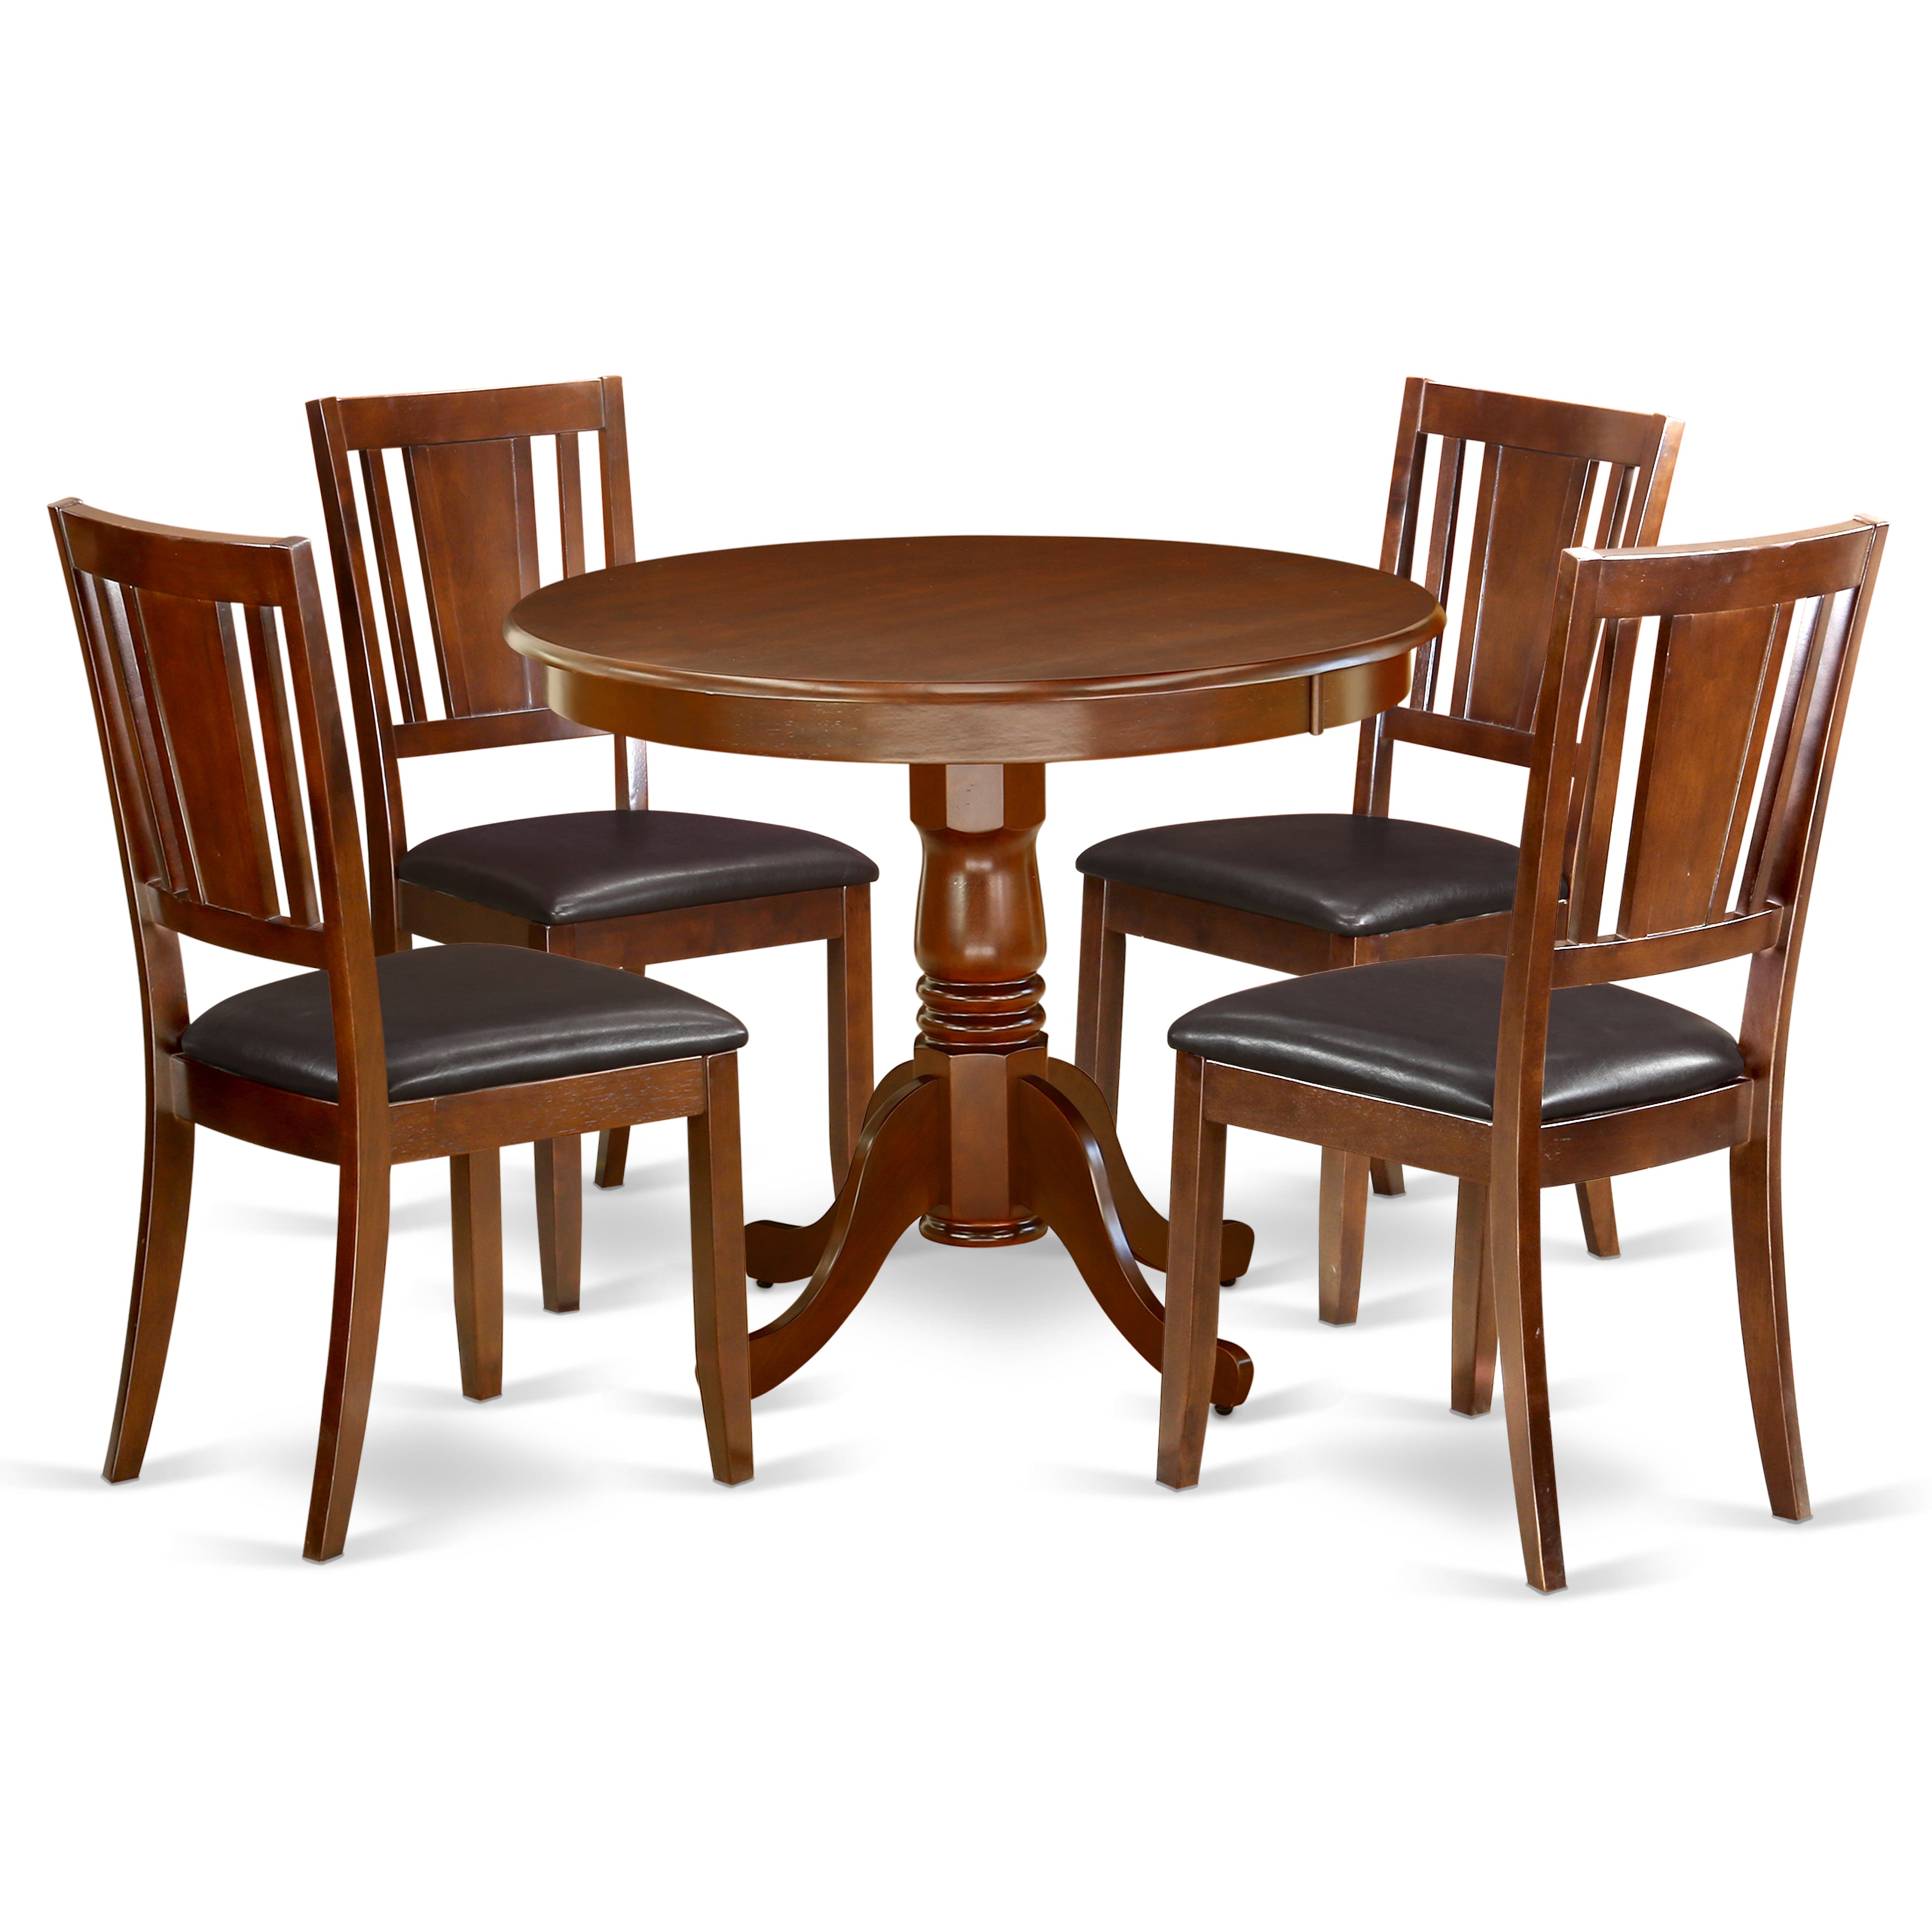 ANDU5-MAH-LC 5Pc Rounded 36" Dining Room Table And Four Faux Leather Seat Chairs